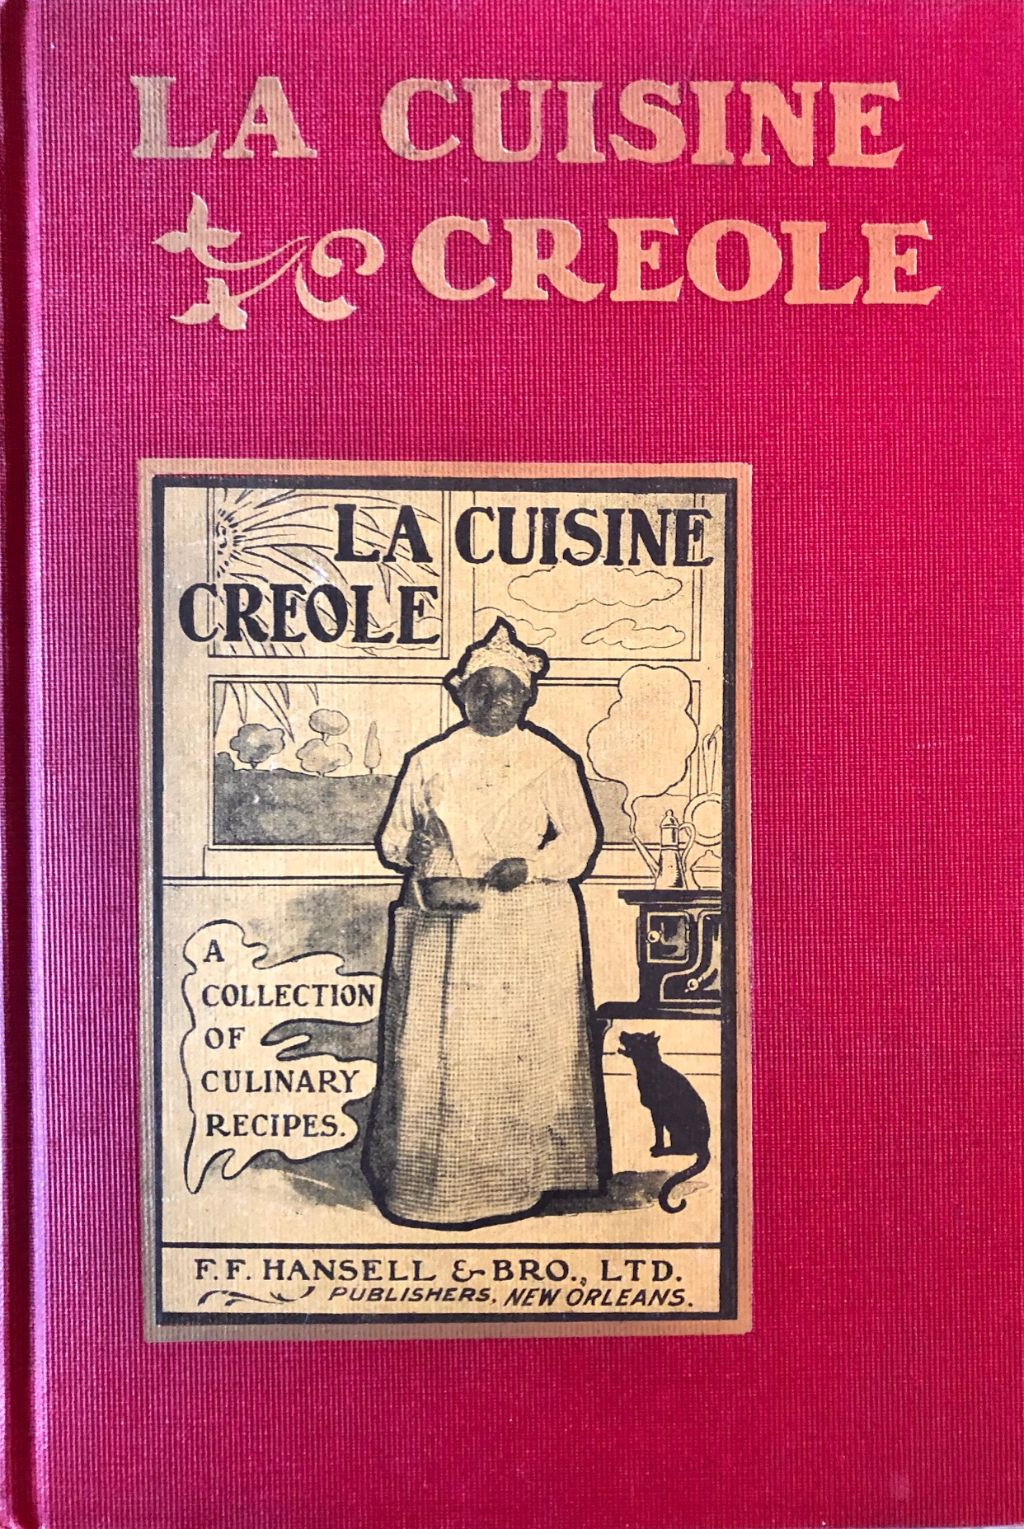 (*NEW ARRIVAL*) (Southern - New Orleans) [Hearn, Lafcadio]. La Cuisine Creole: A Collection of Culinary Recipes, From Leading Chefs and Noted Creole Housewives, Who Have Made New Orleans Famous for its Cuisine.